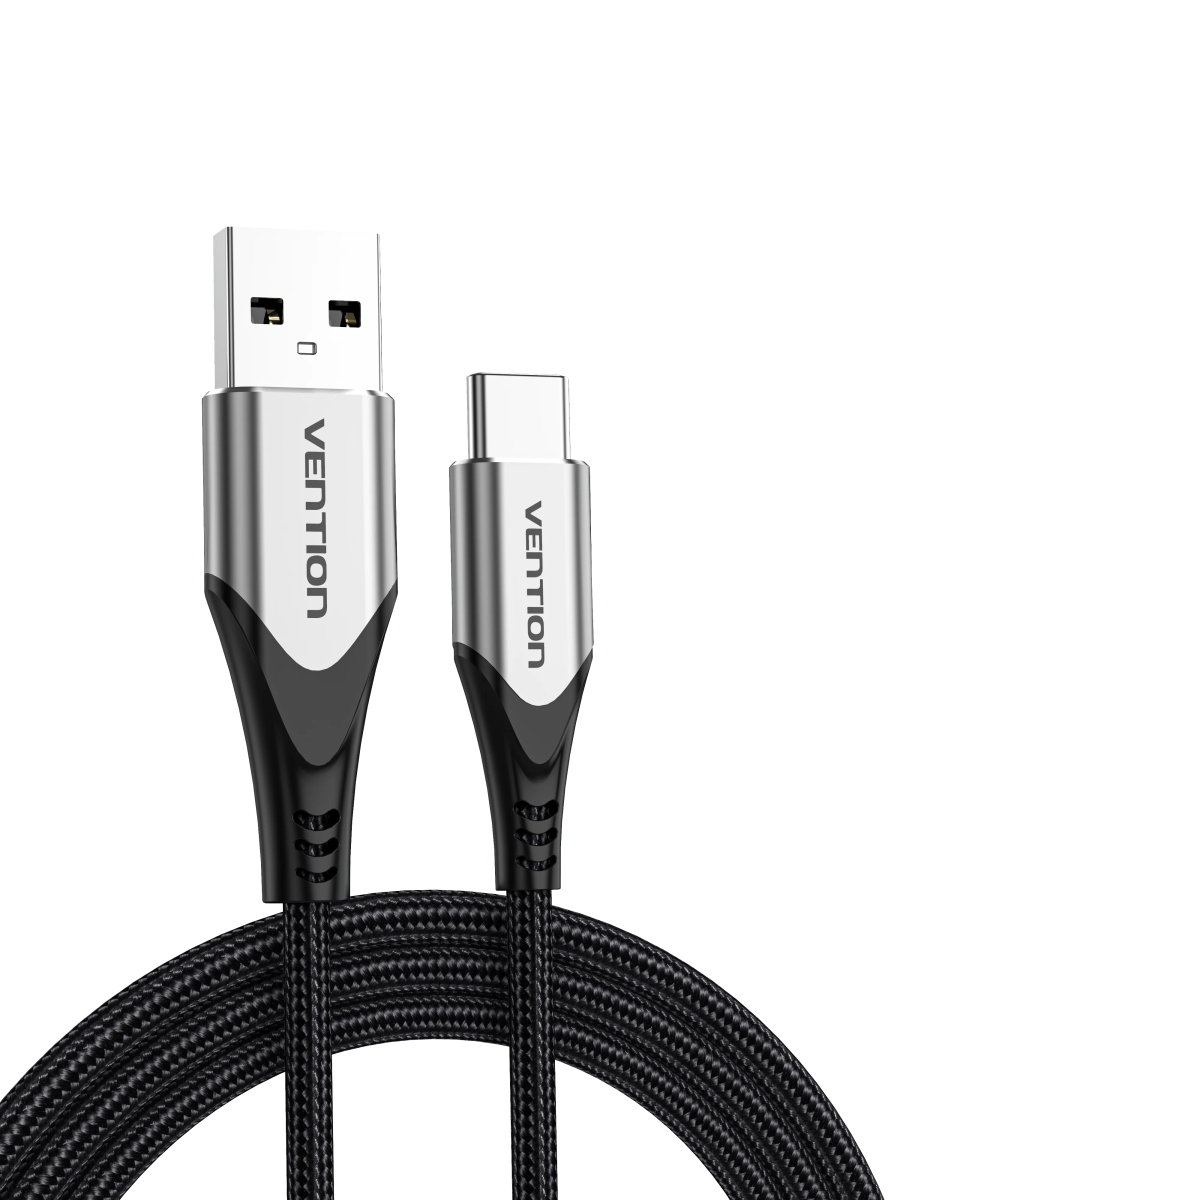 Vention Cotton Braided USB 2.0 A Male to C Male 3A Cable 2M Gray Aluminum Alloy Type - Vertexhub Shop-vention